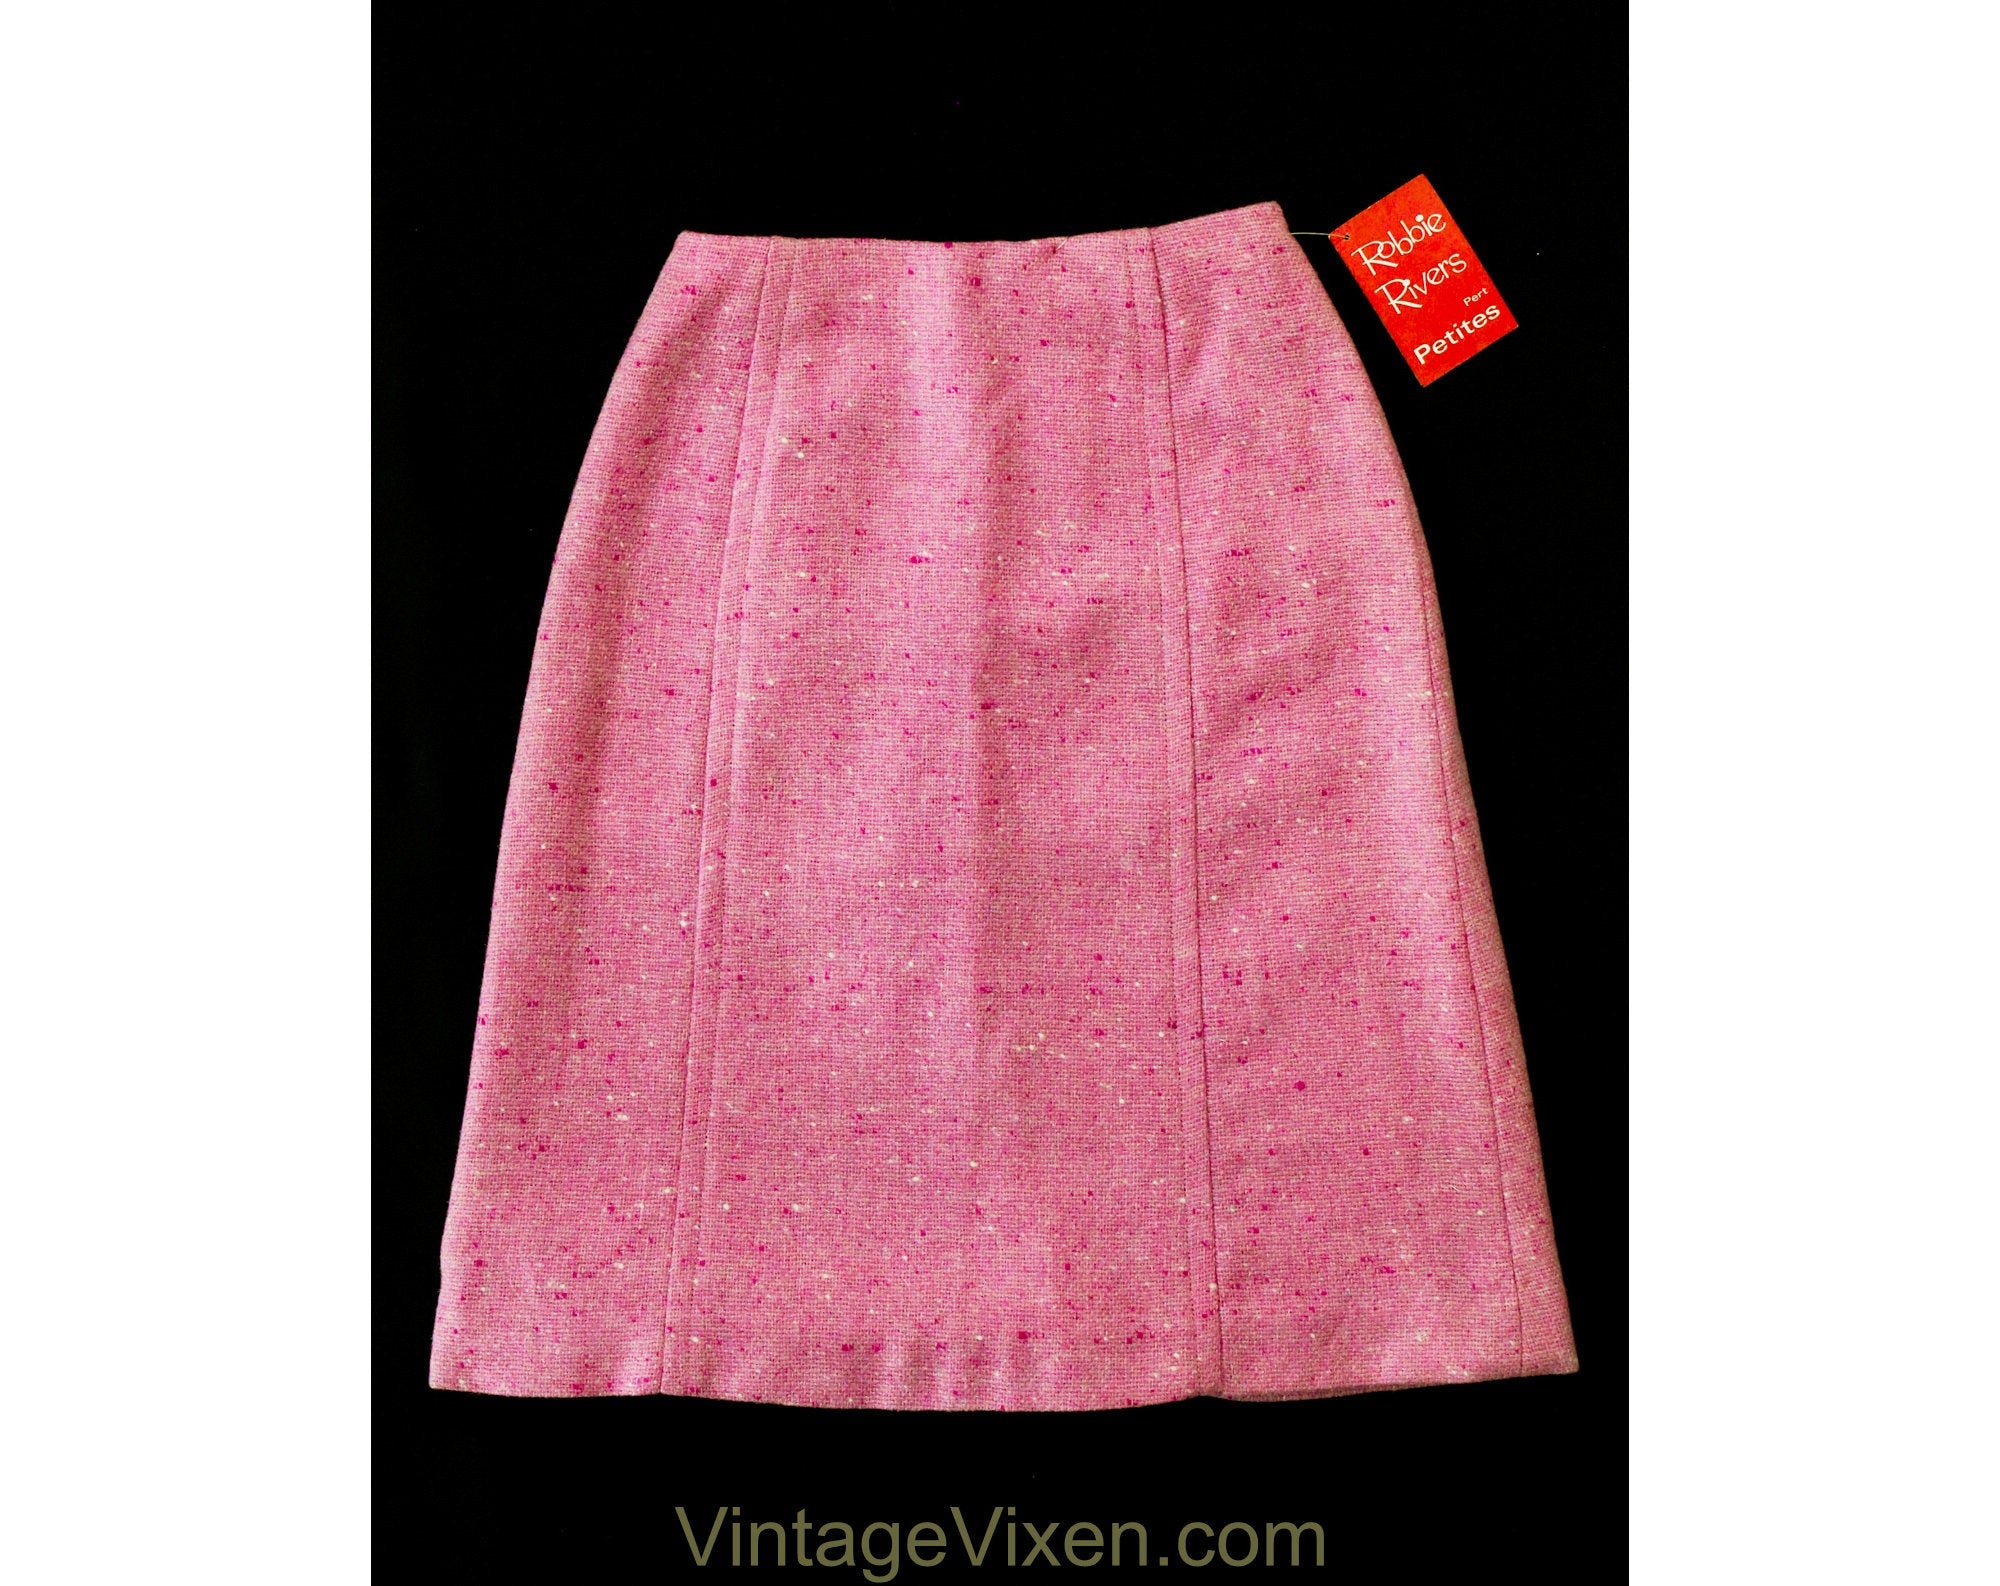 Size 000 Pink Tweed Skirt - 1960s Nubby Flecked Rose Office Wear